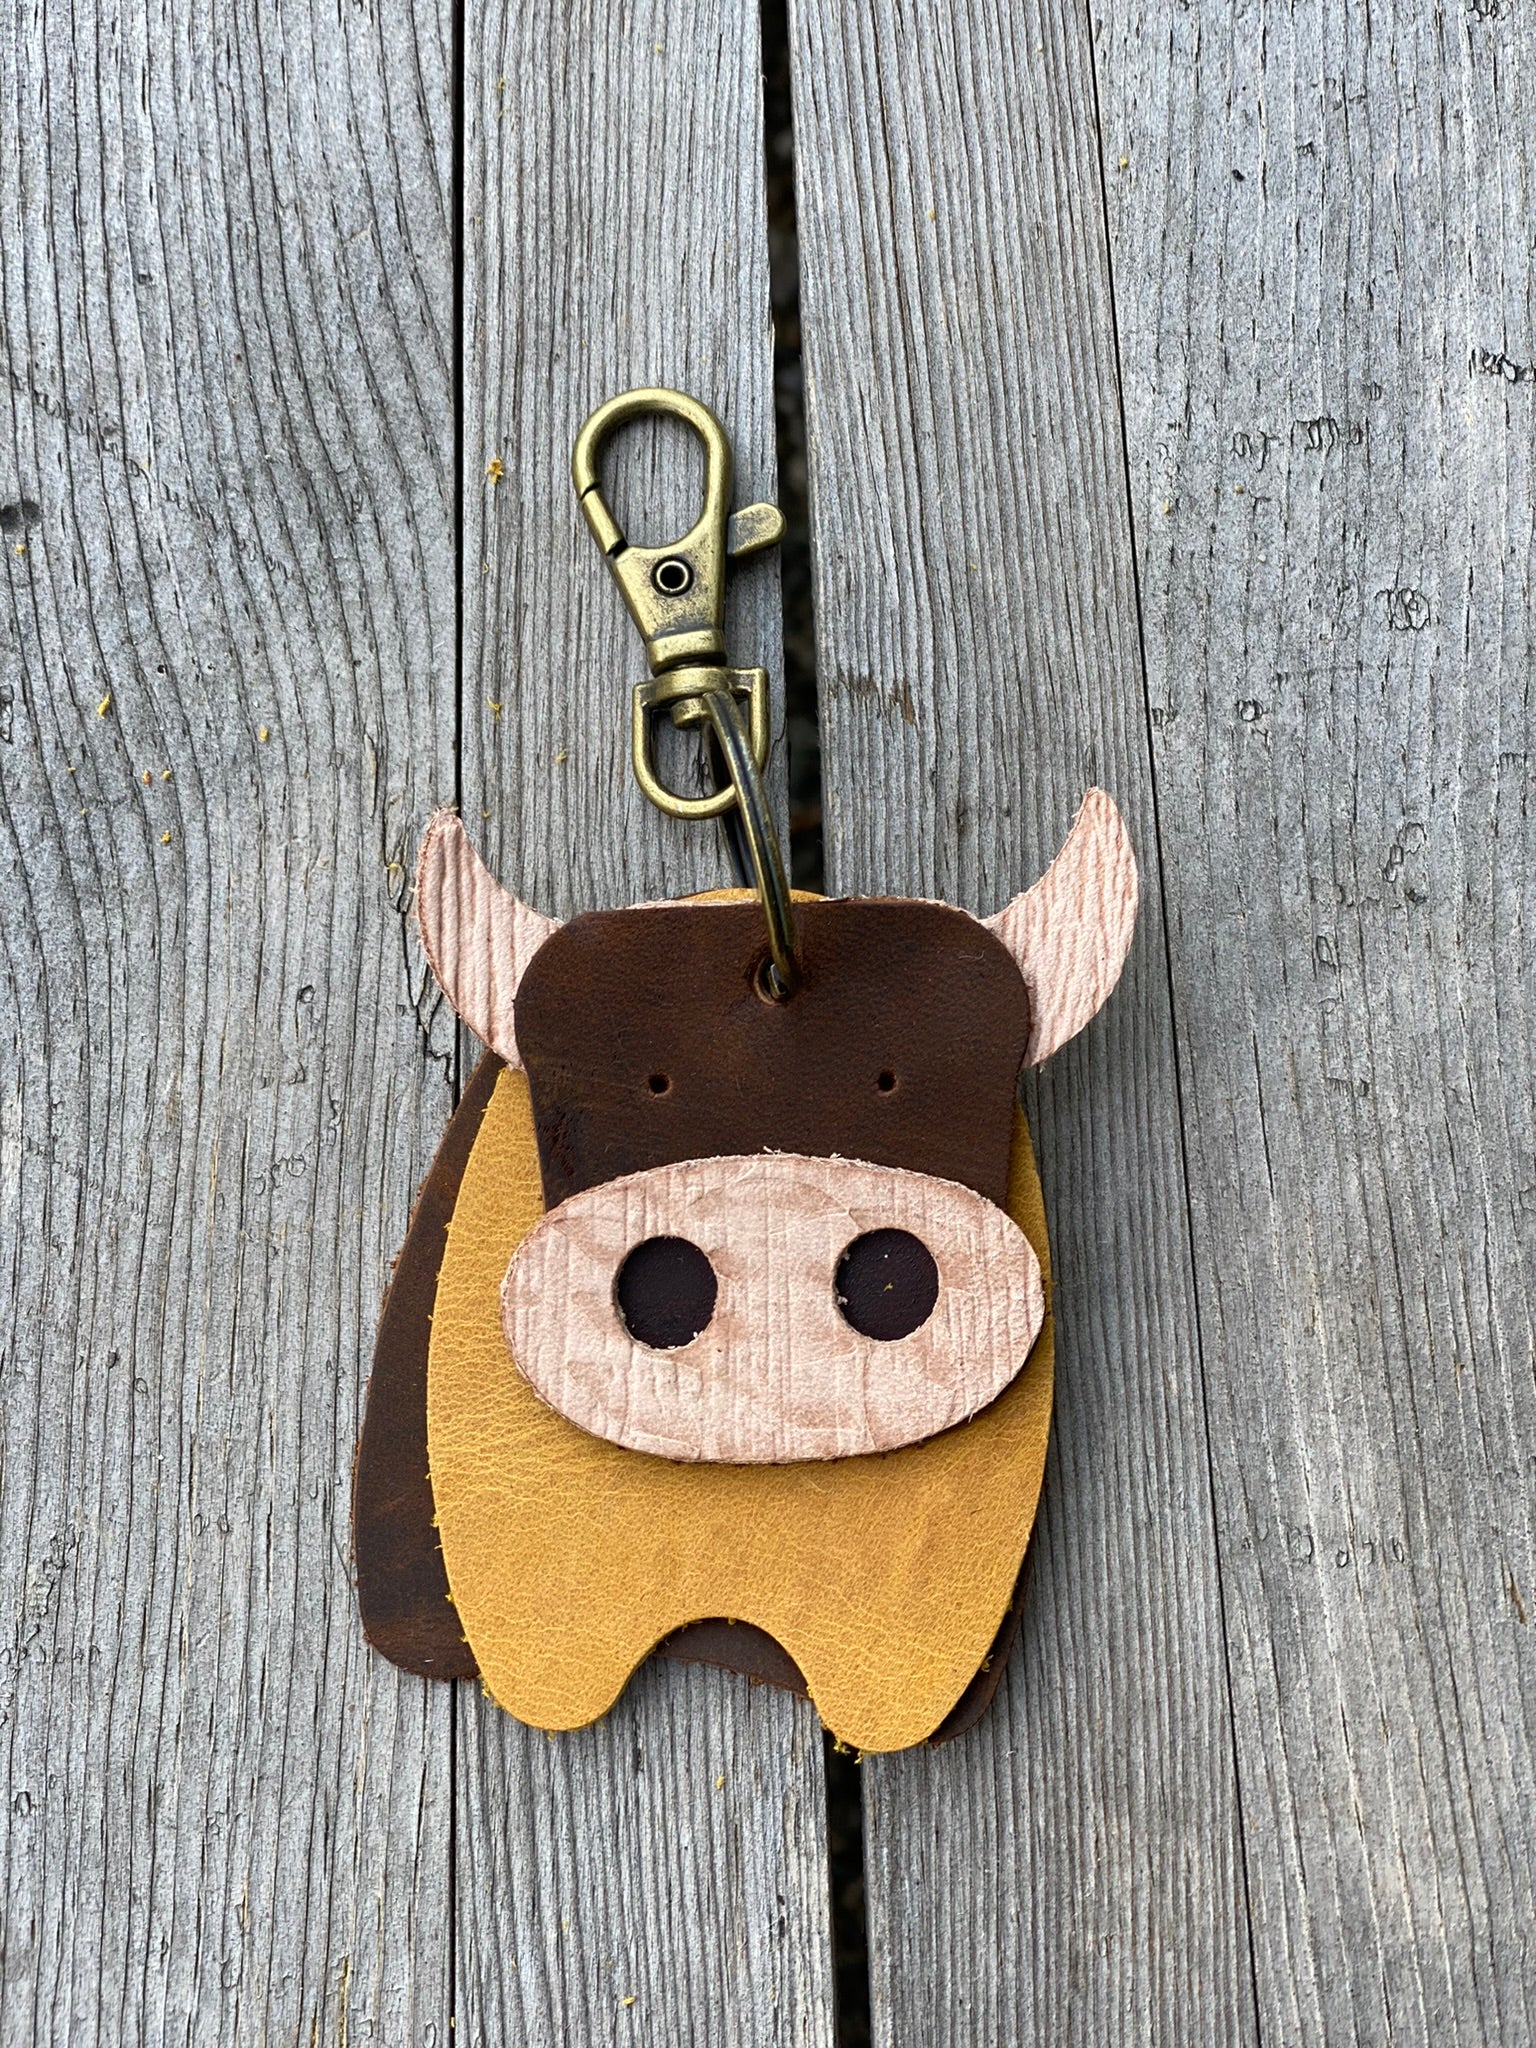 Leather Cow Keyring Purse Charm, Bag Clip on Cow Fob, Cute Cow Lovers Accessory